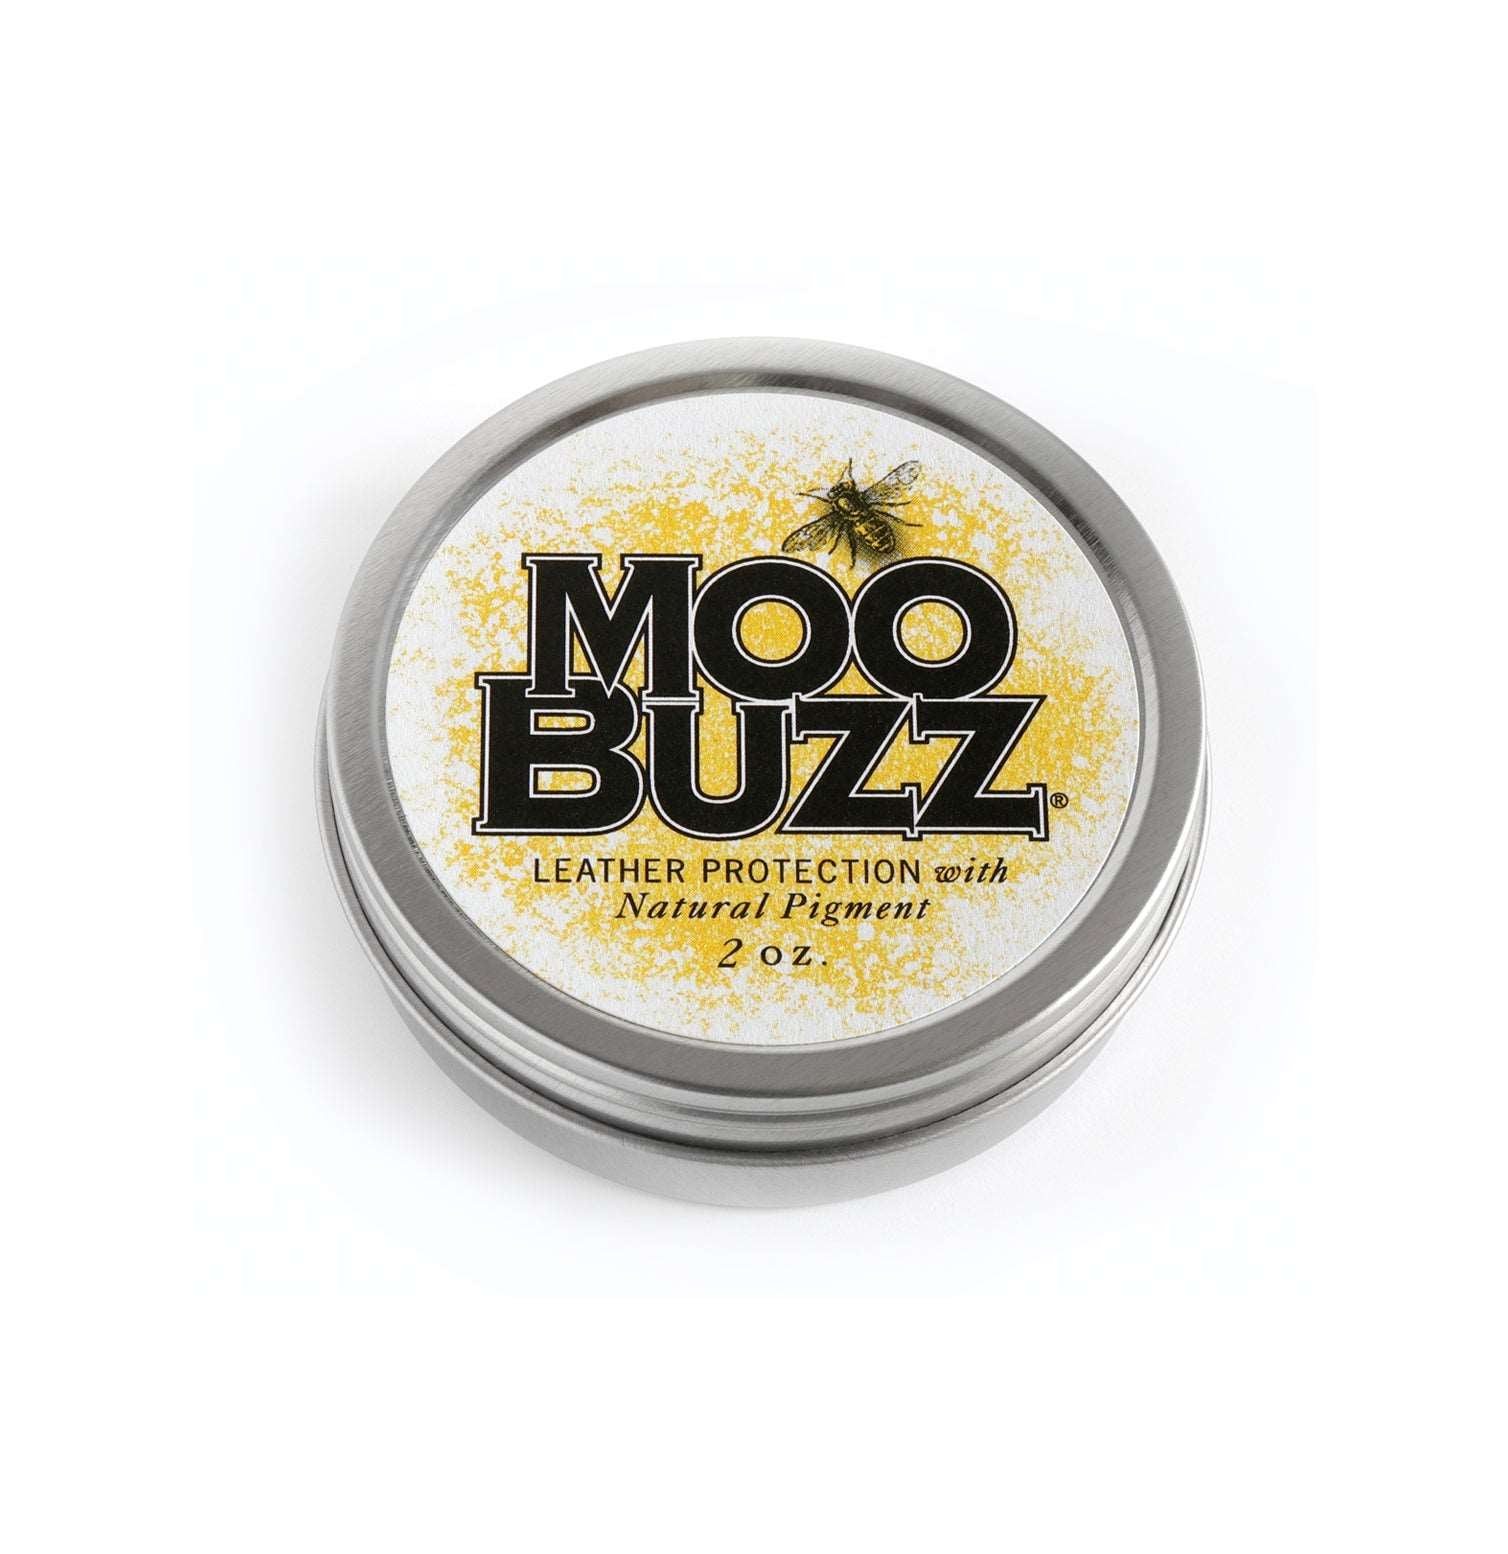 2 ounce single closed MooBuzz Matte Color tin